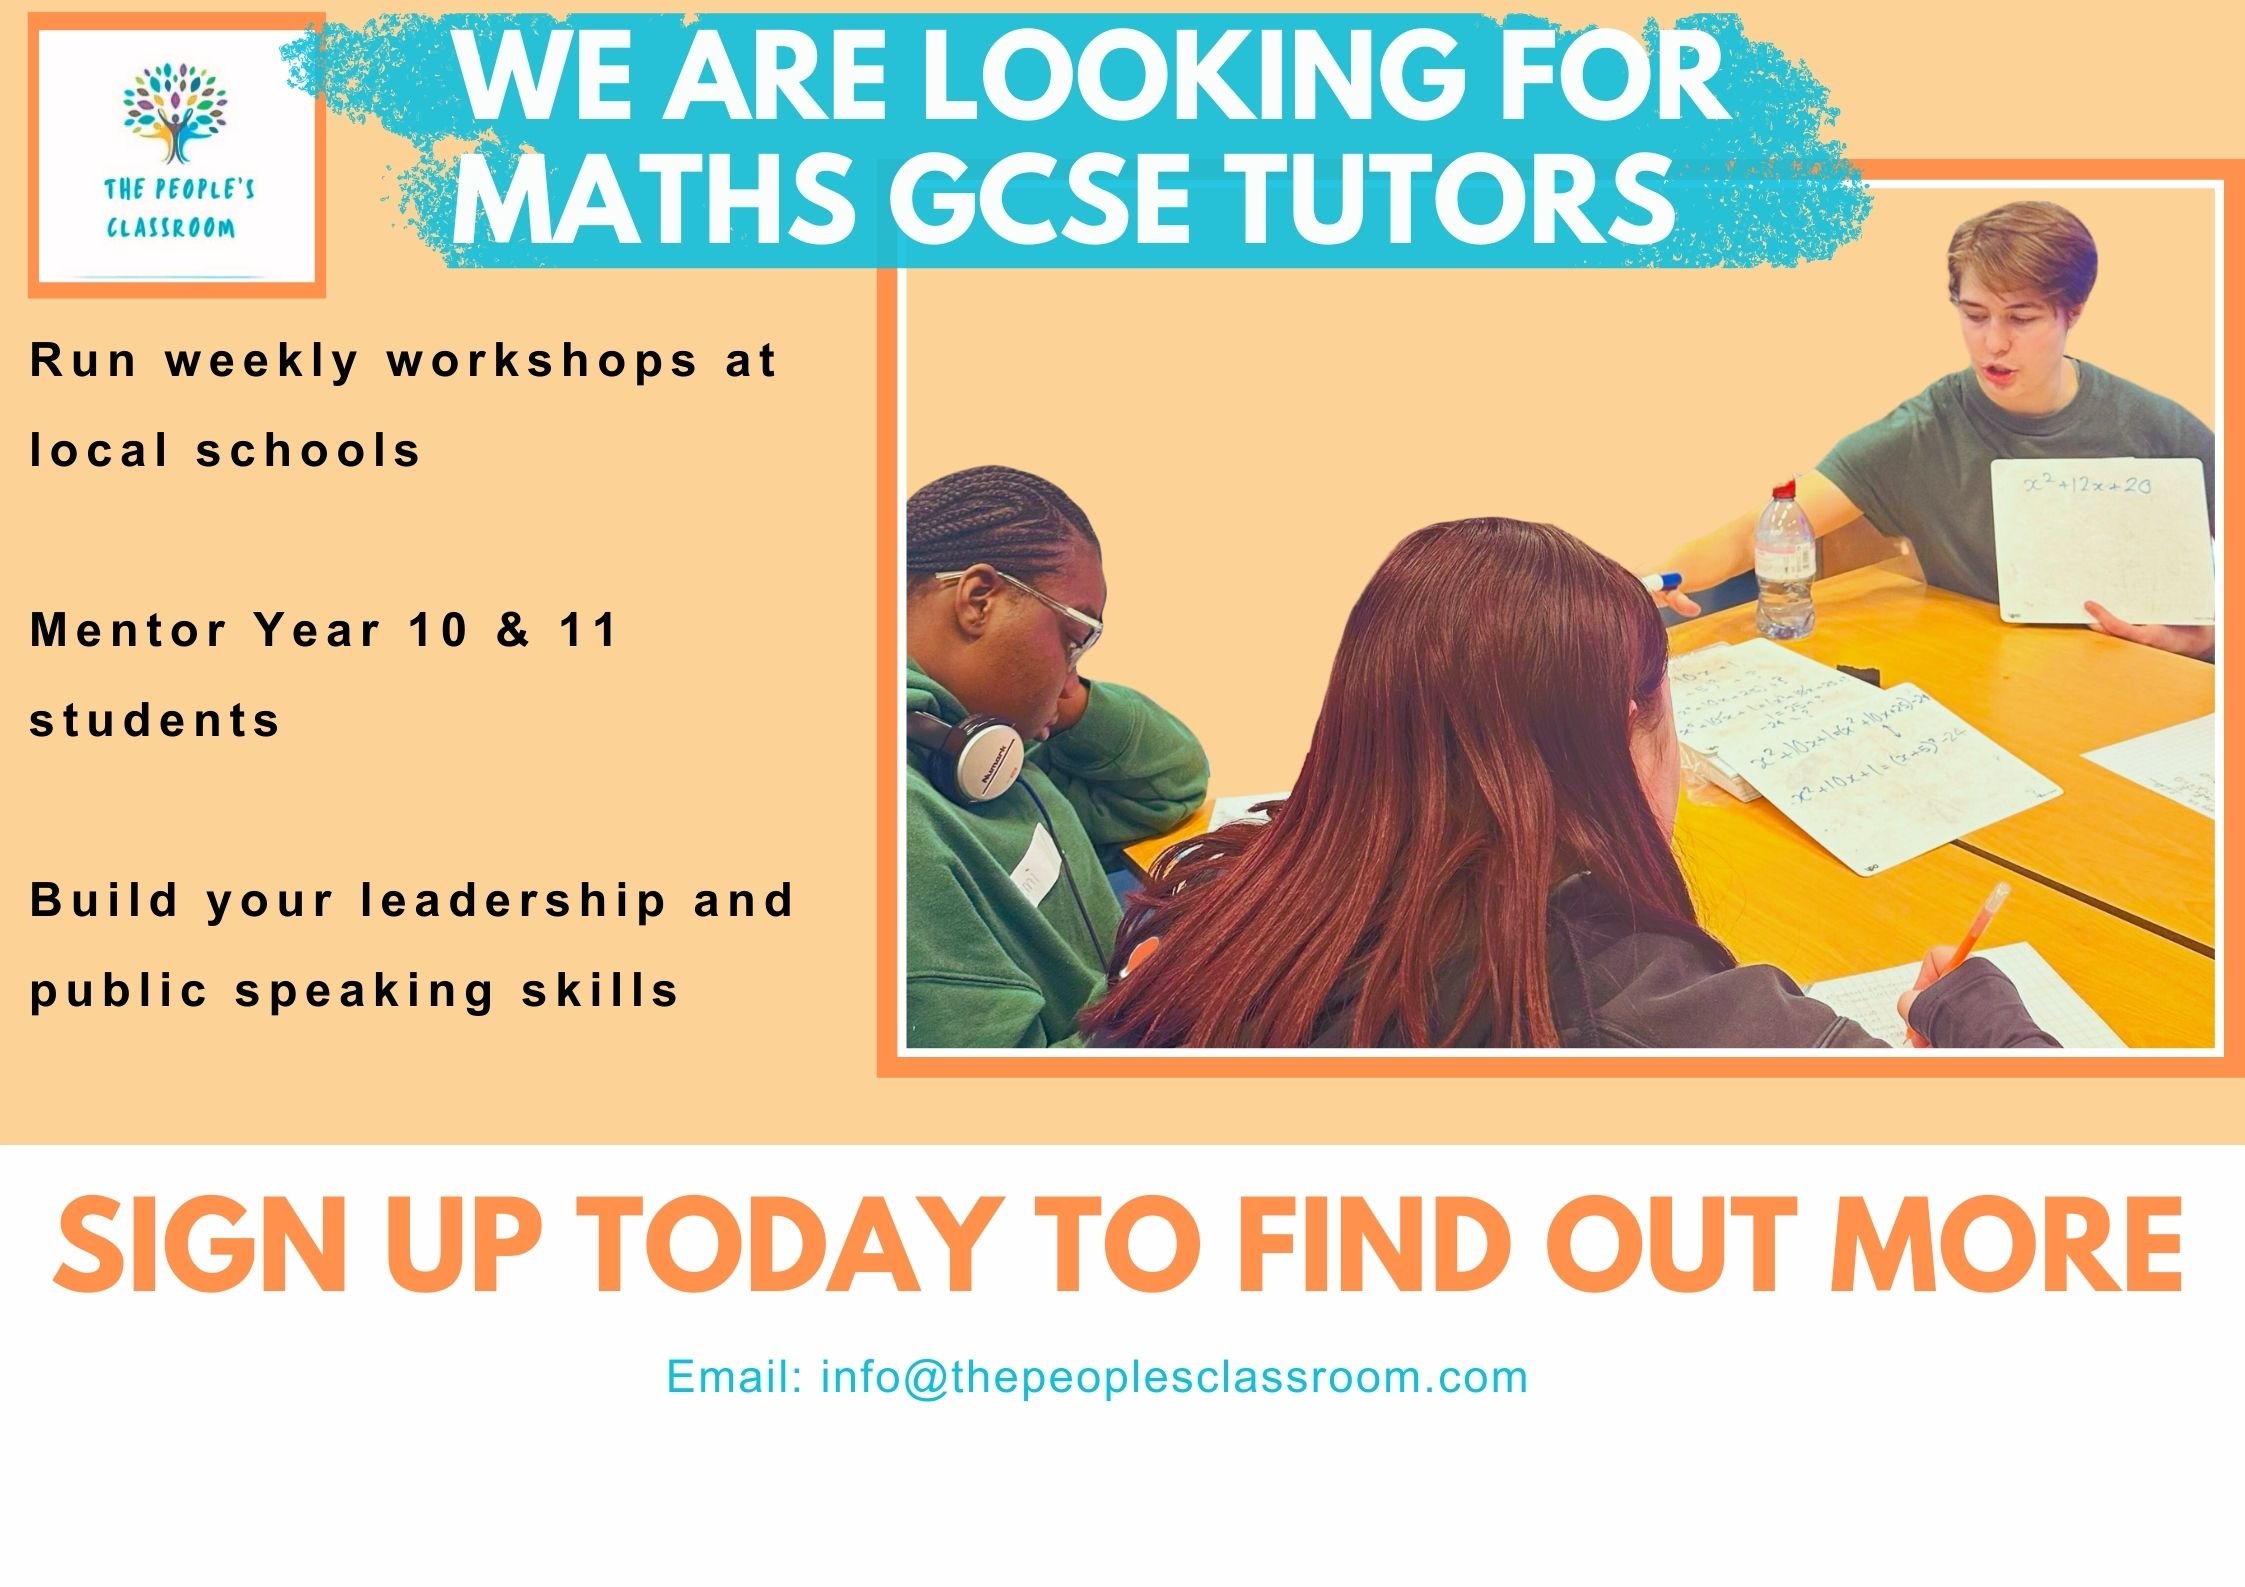 We are looking for Maths GCSE tutors to deliver weekly revision workshops and local secondary schools